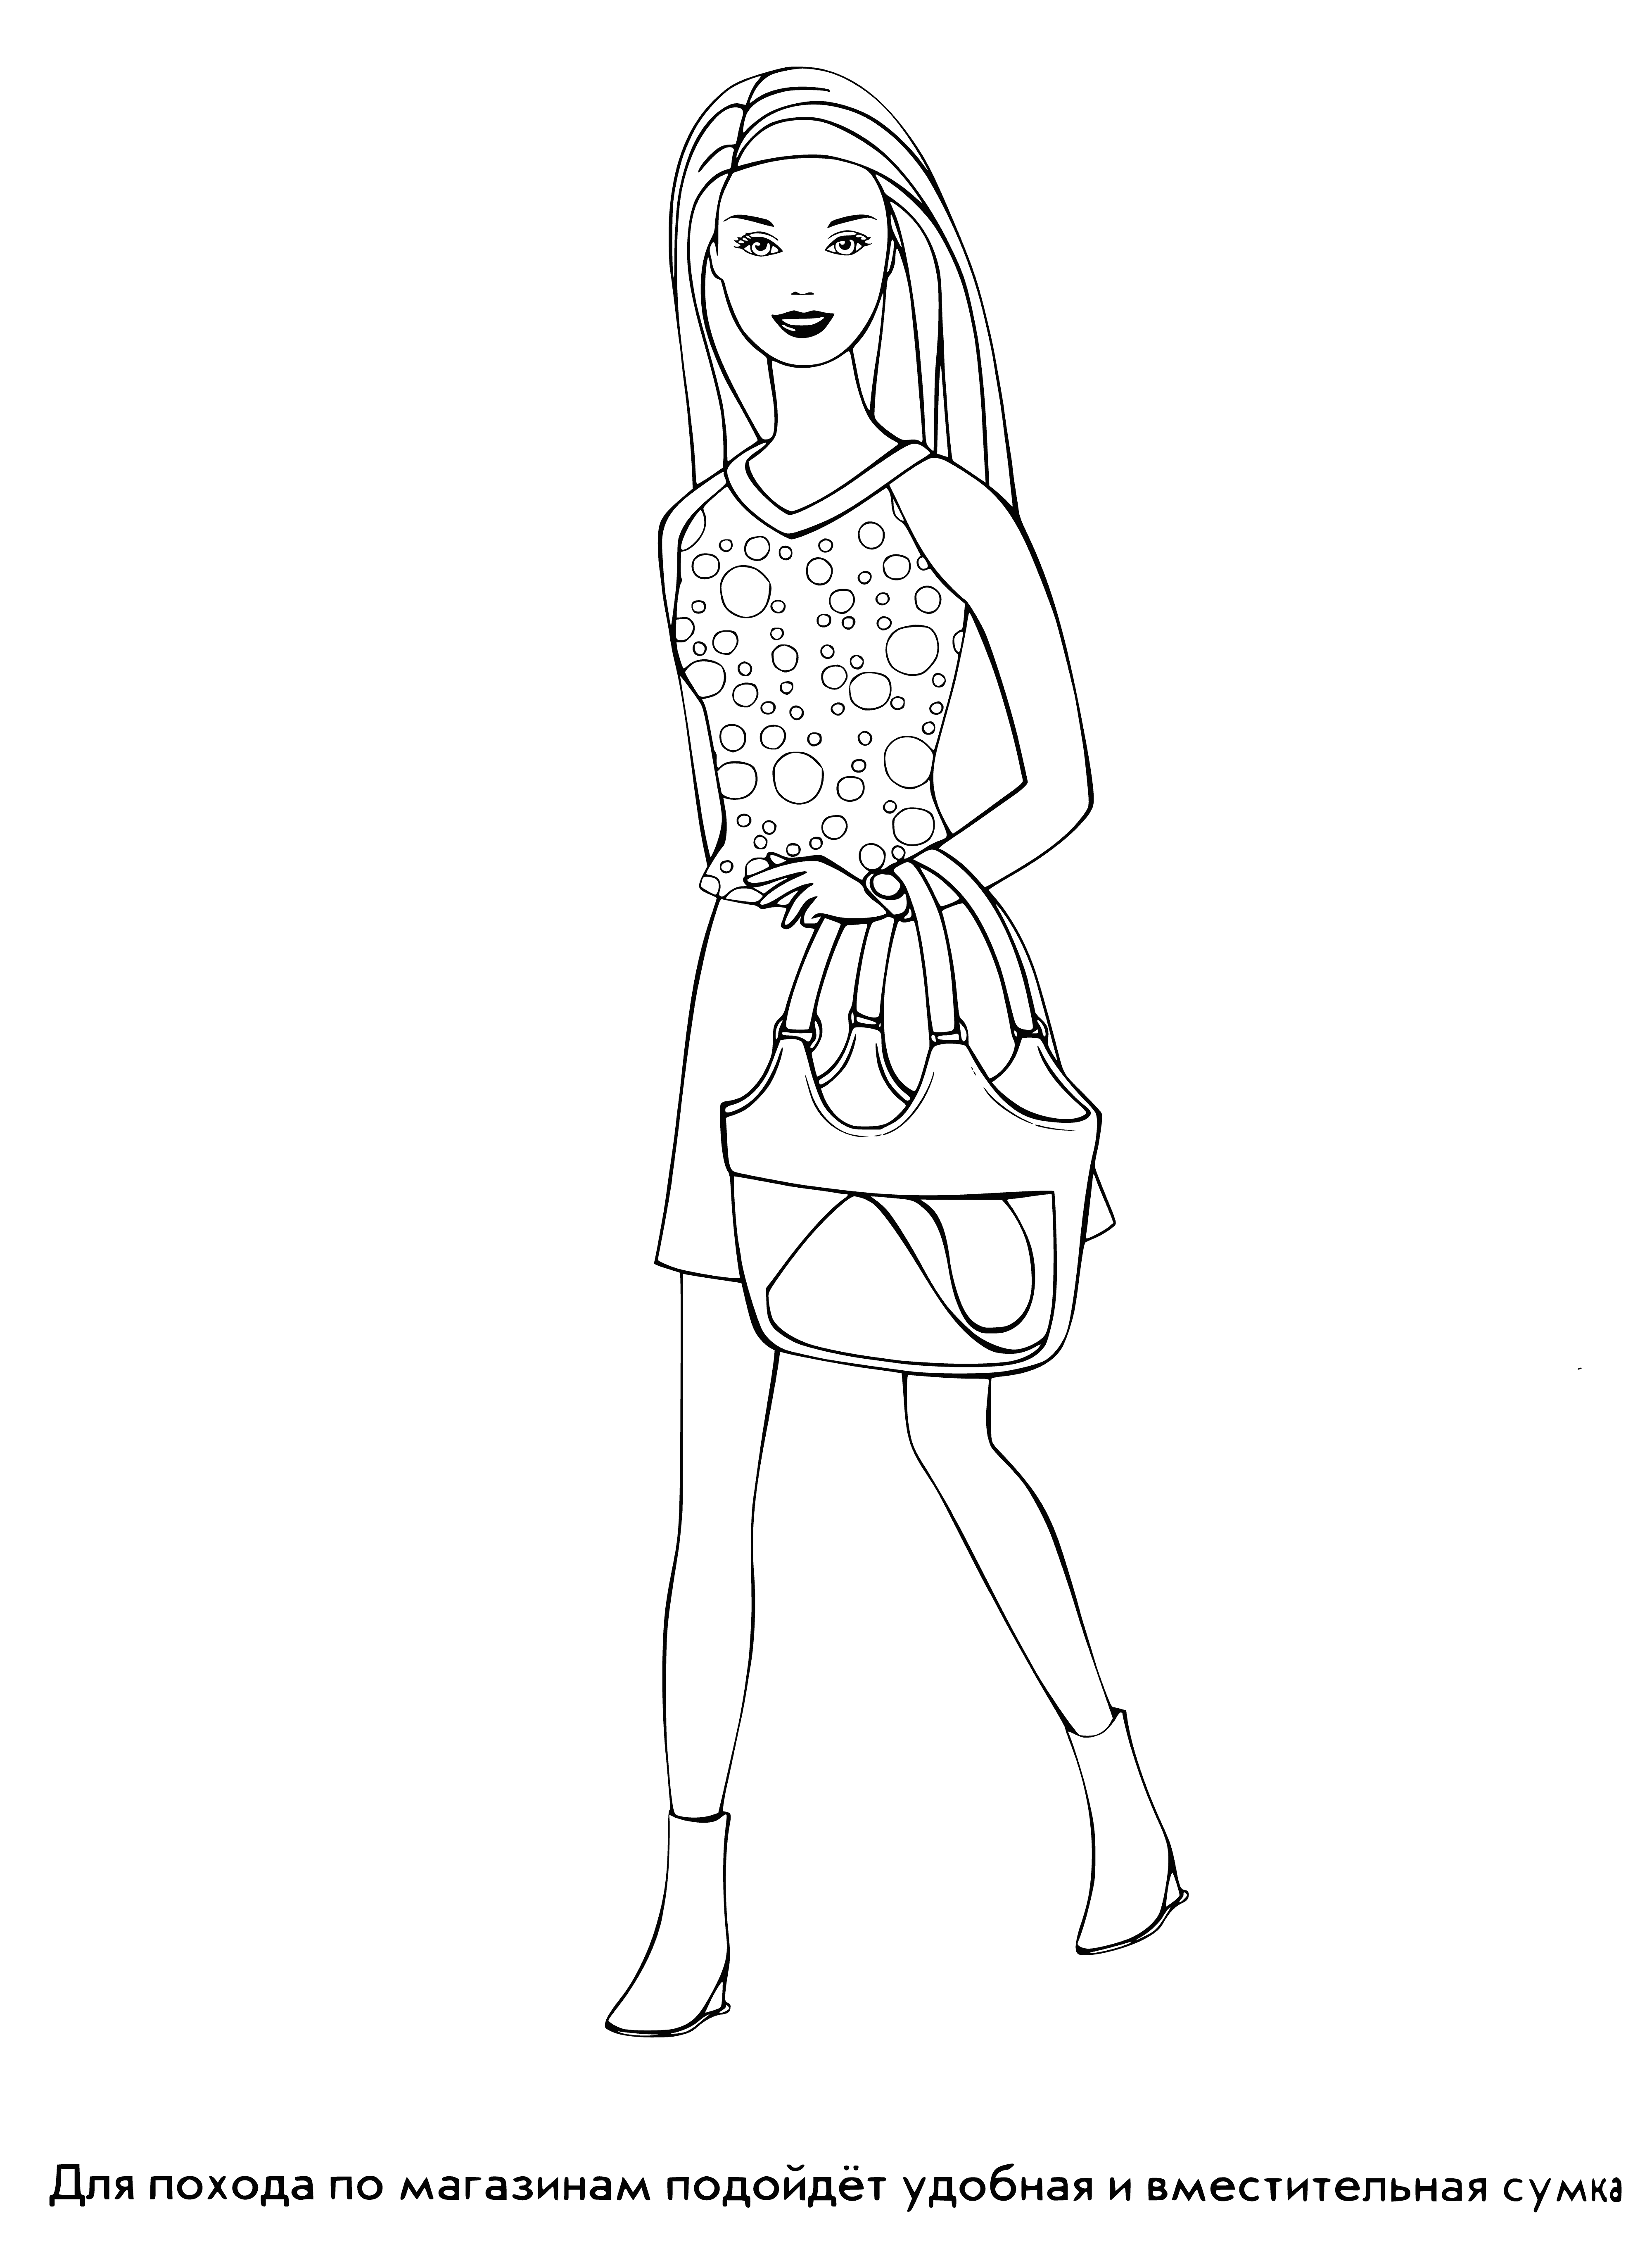 coloring page: Barbie stands in a clam shell wearing a pink one-piece, with ruffles & accessories. Her hair in a side ponytail, she wears a seashell necklace & fishtail. #Barbie #ColoringPage